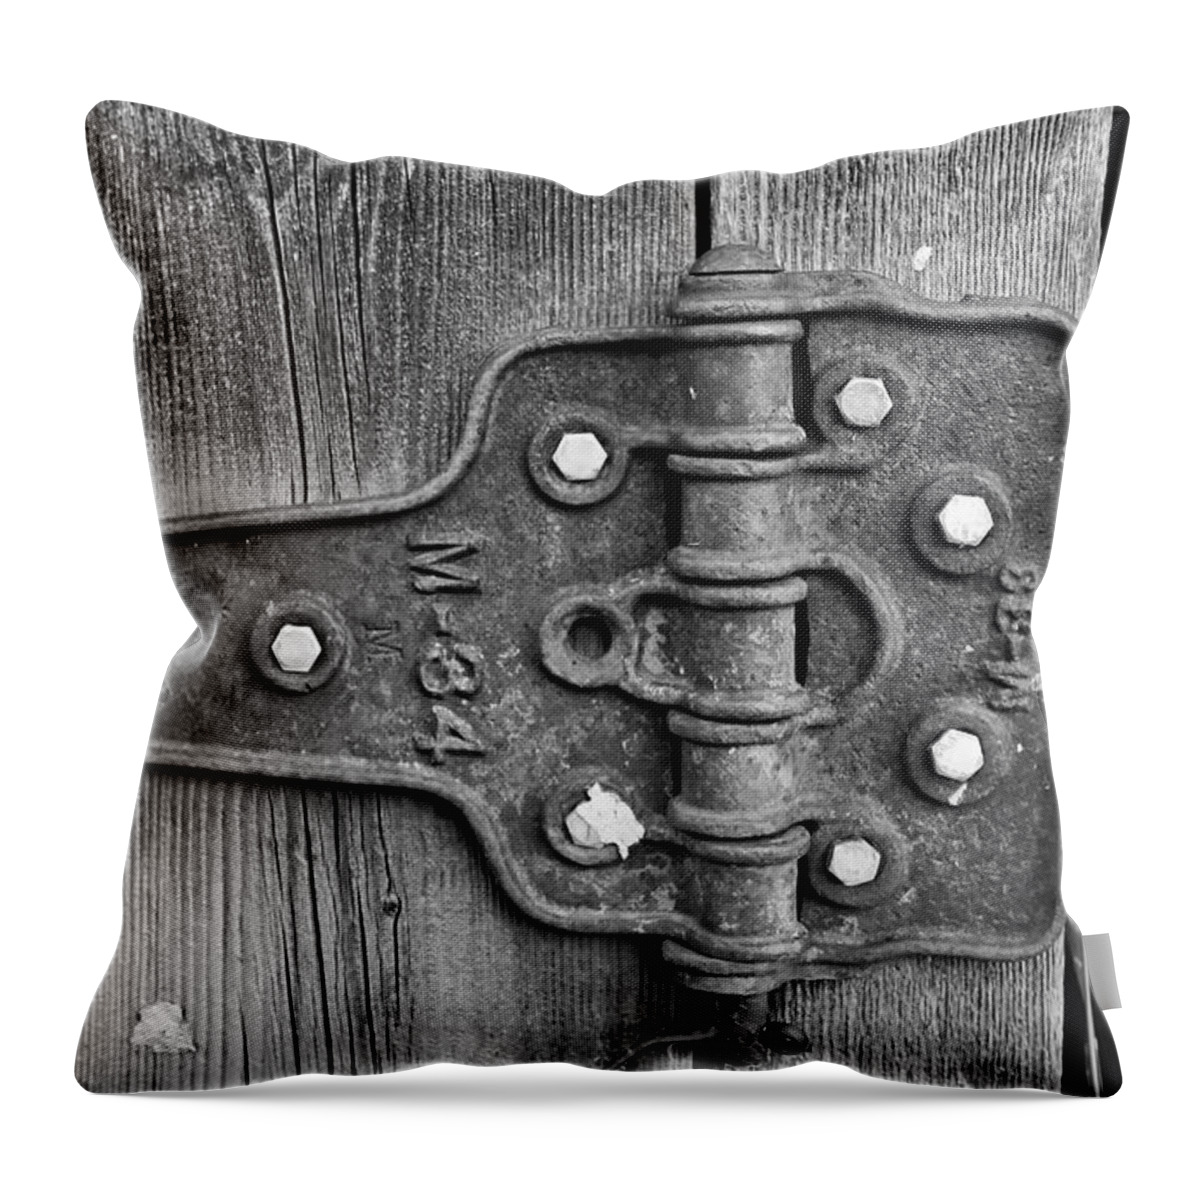 Rustic Throw Pillow featuring the photograph Barn Hinge by Tom Gresham